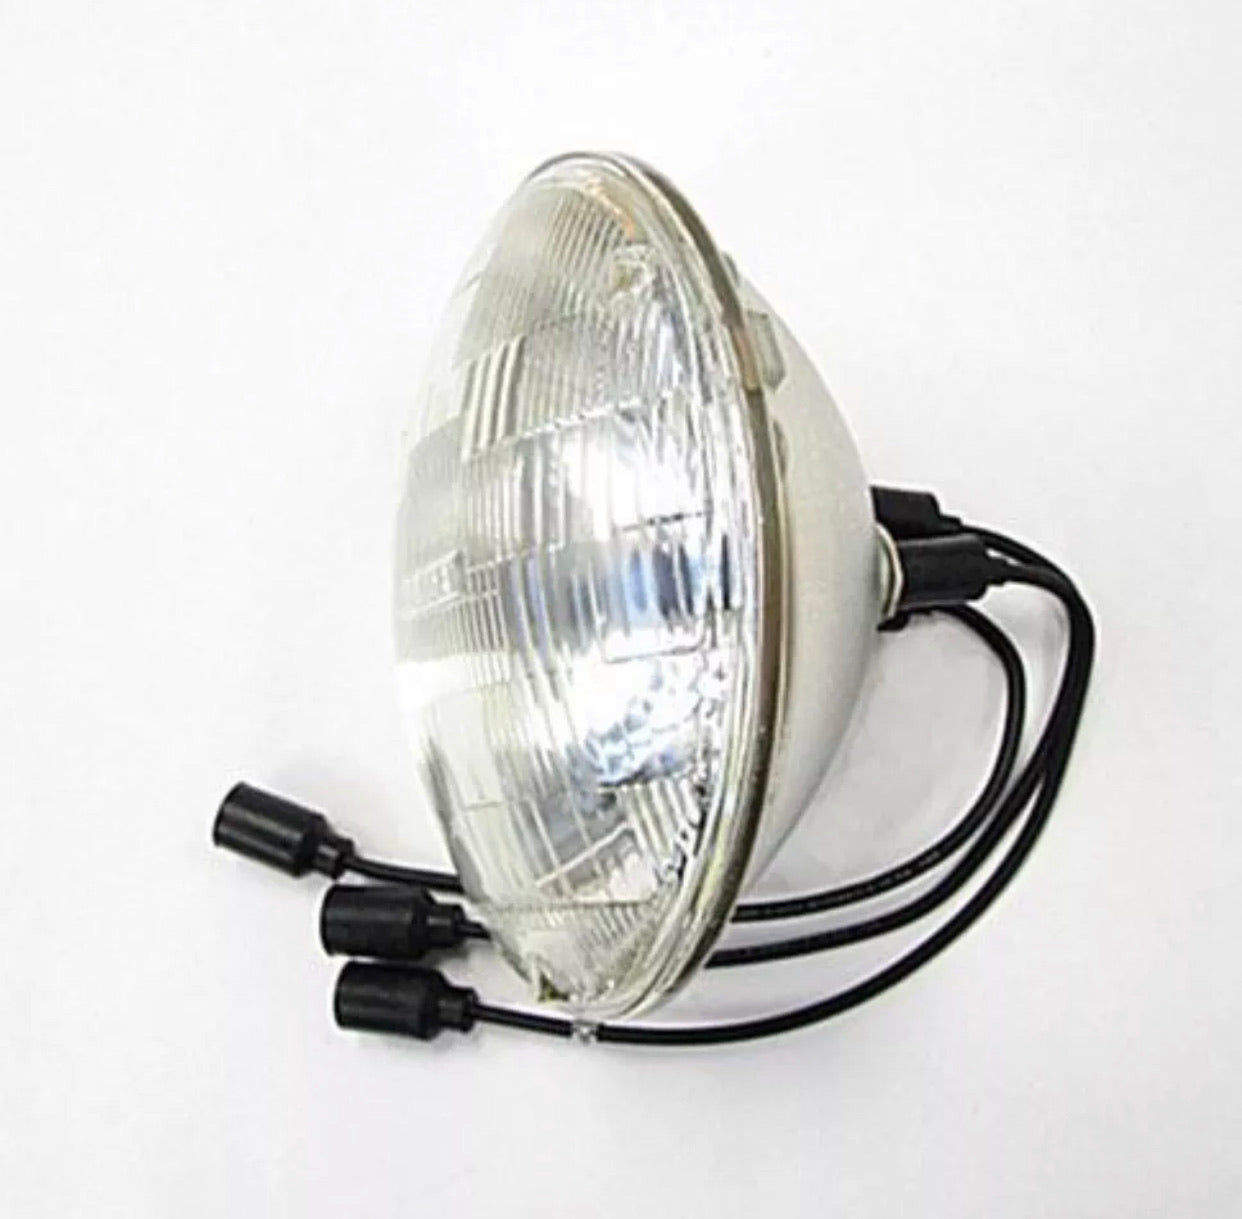 OEM Military Headlight Incandescent for HUMVEE M151 M151A1 JEEP M35 M35A2 M998 M900 Series